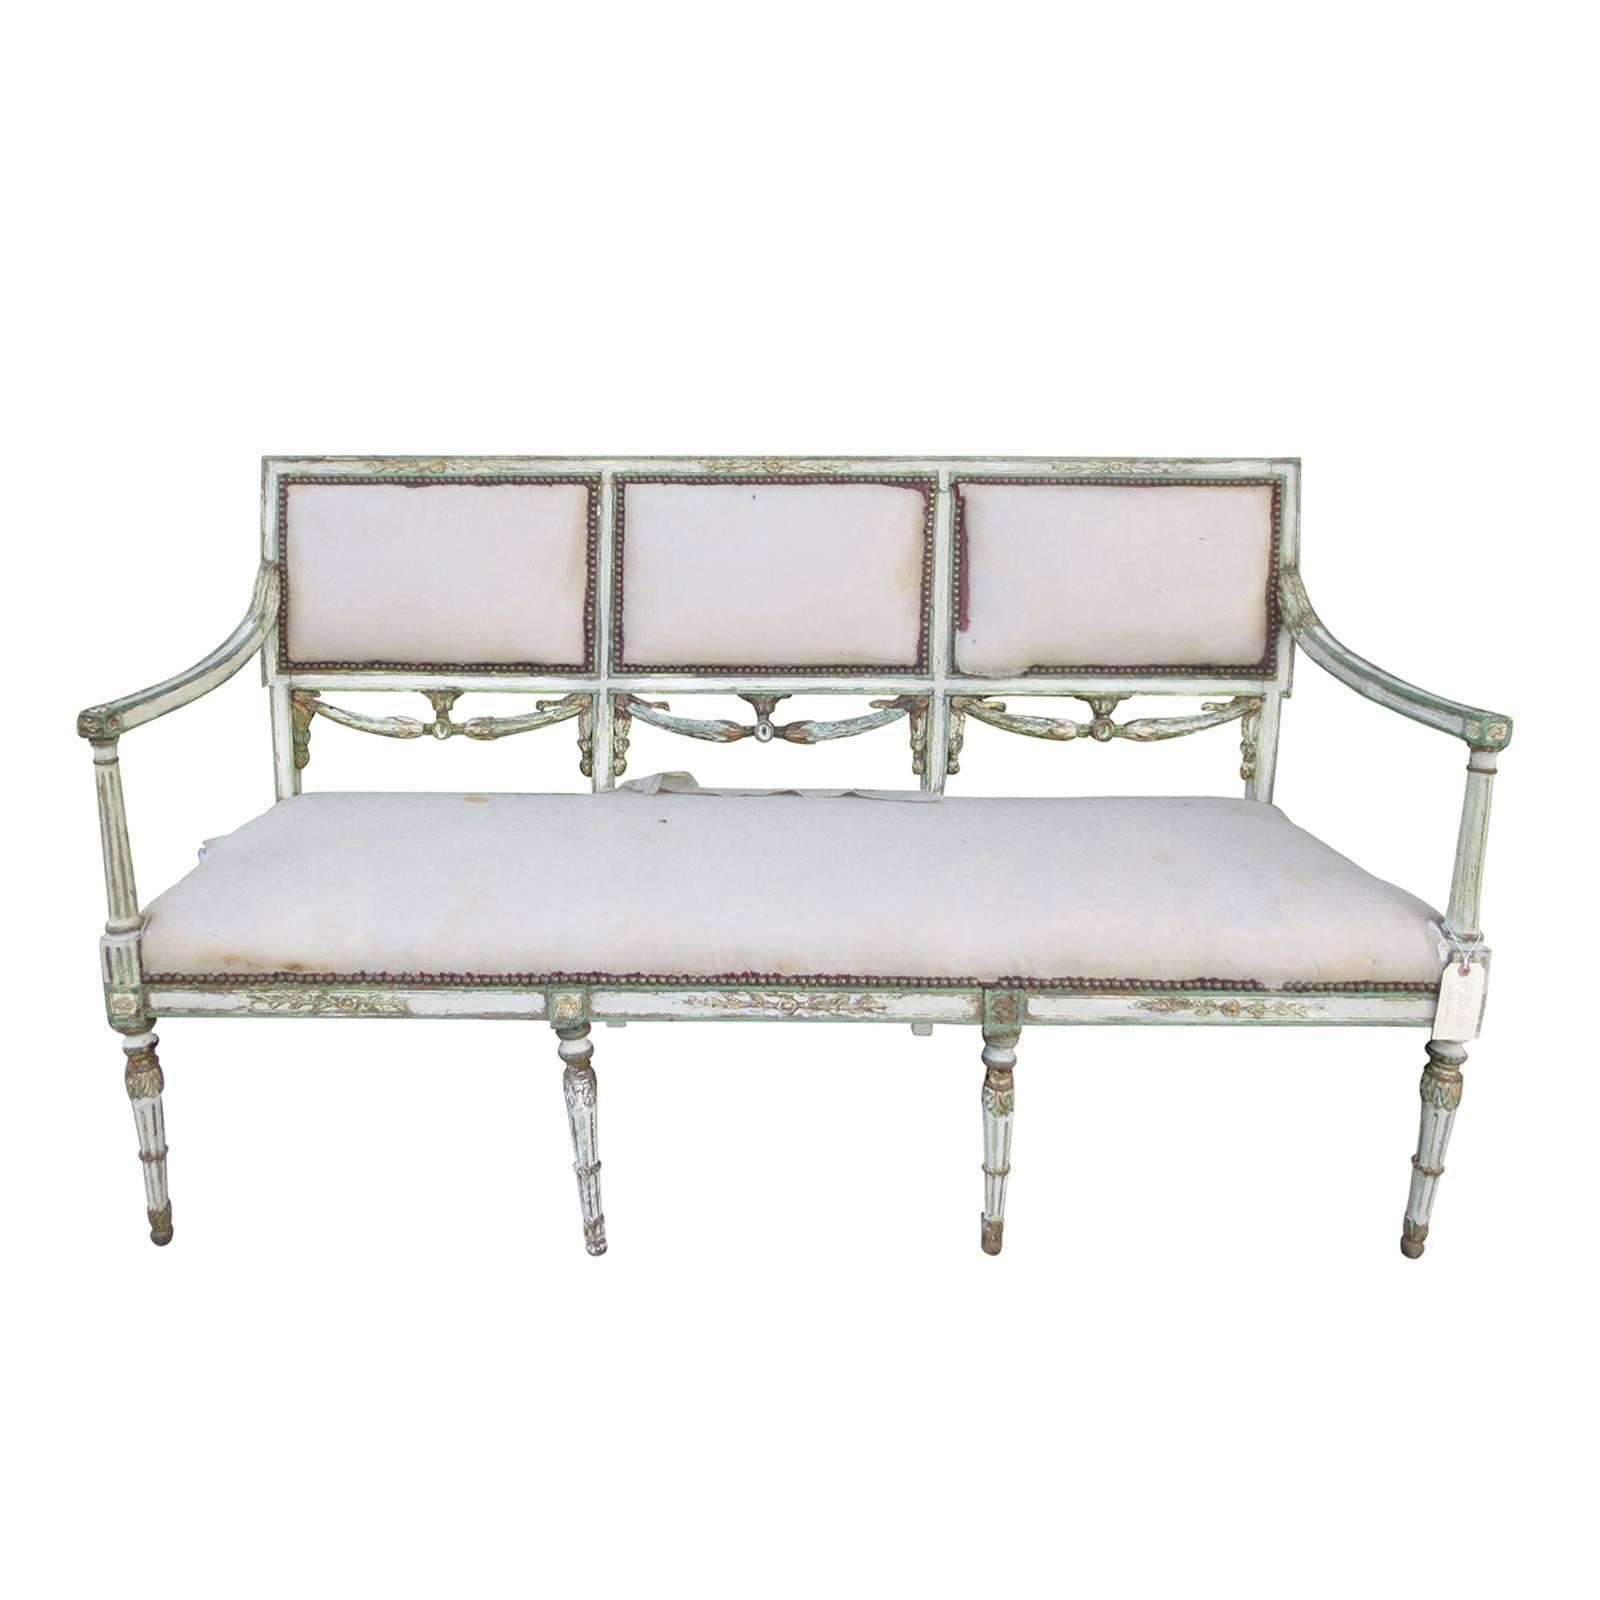 18th-19th Century Italian Neoclassical Painted Settee